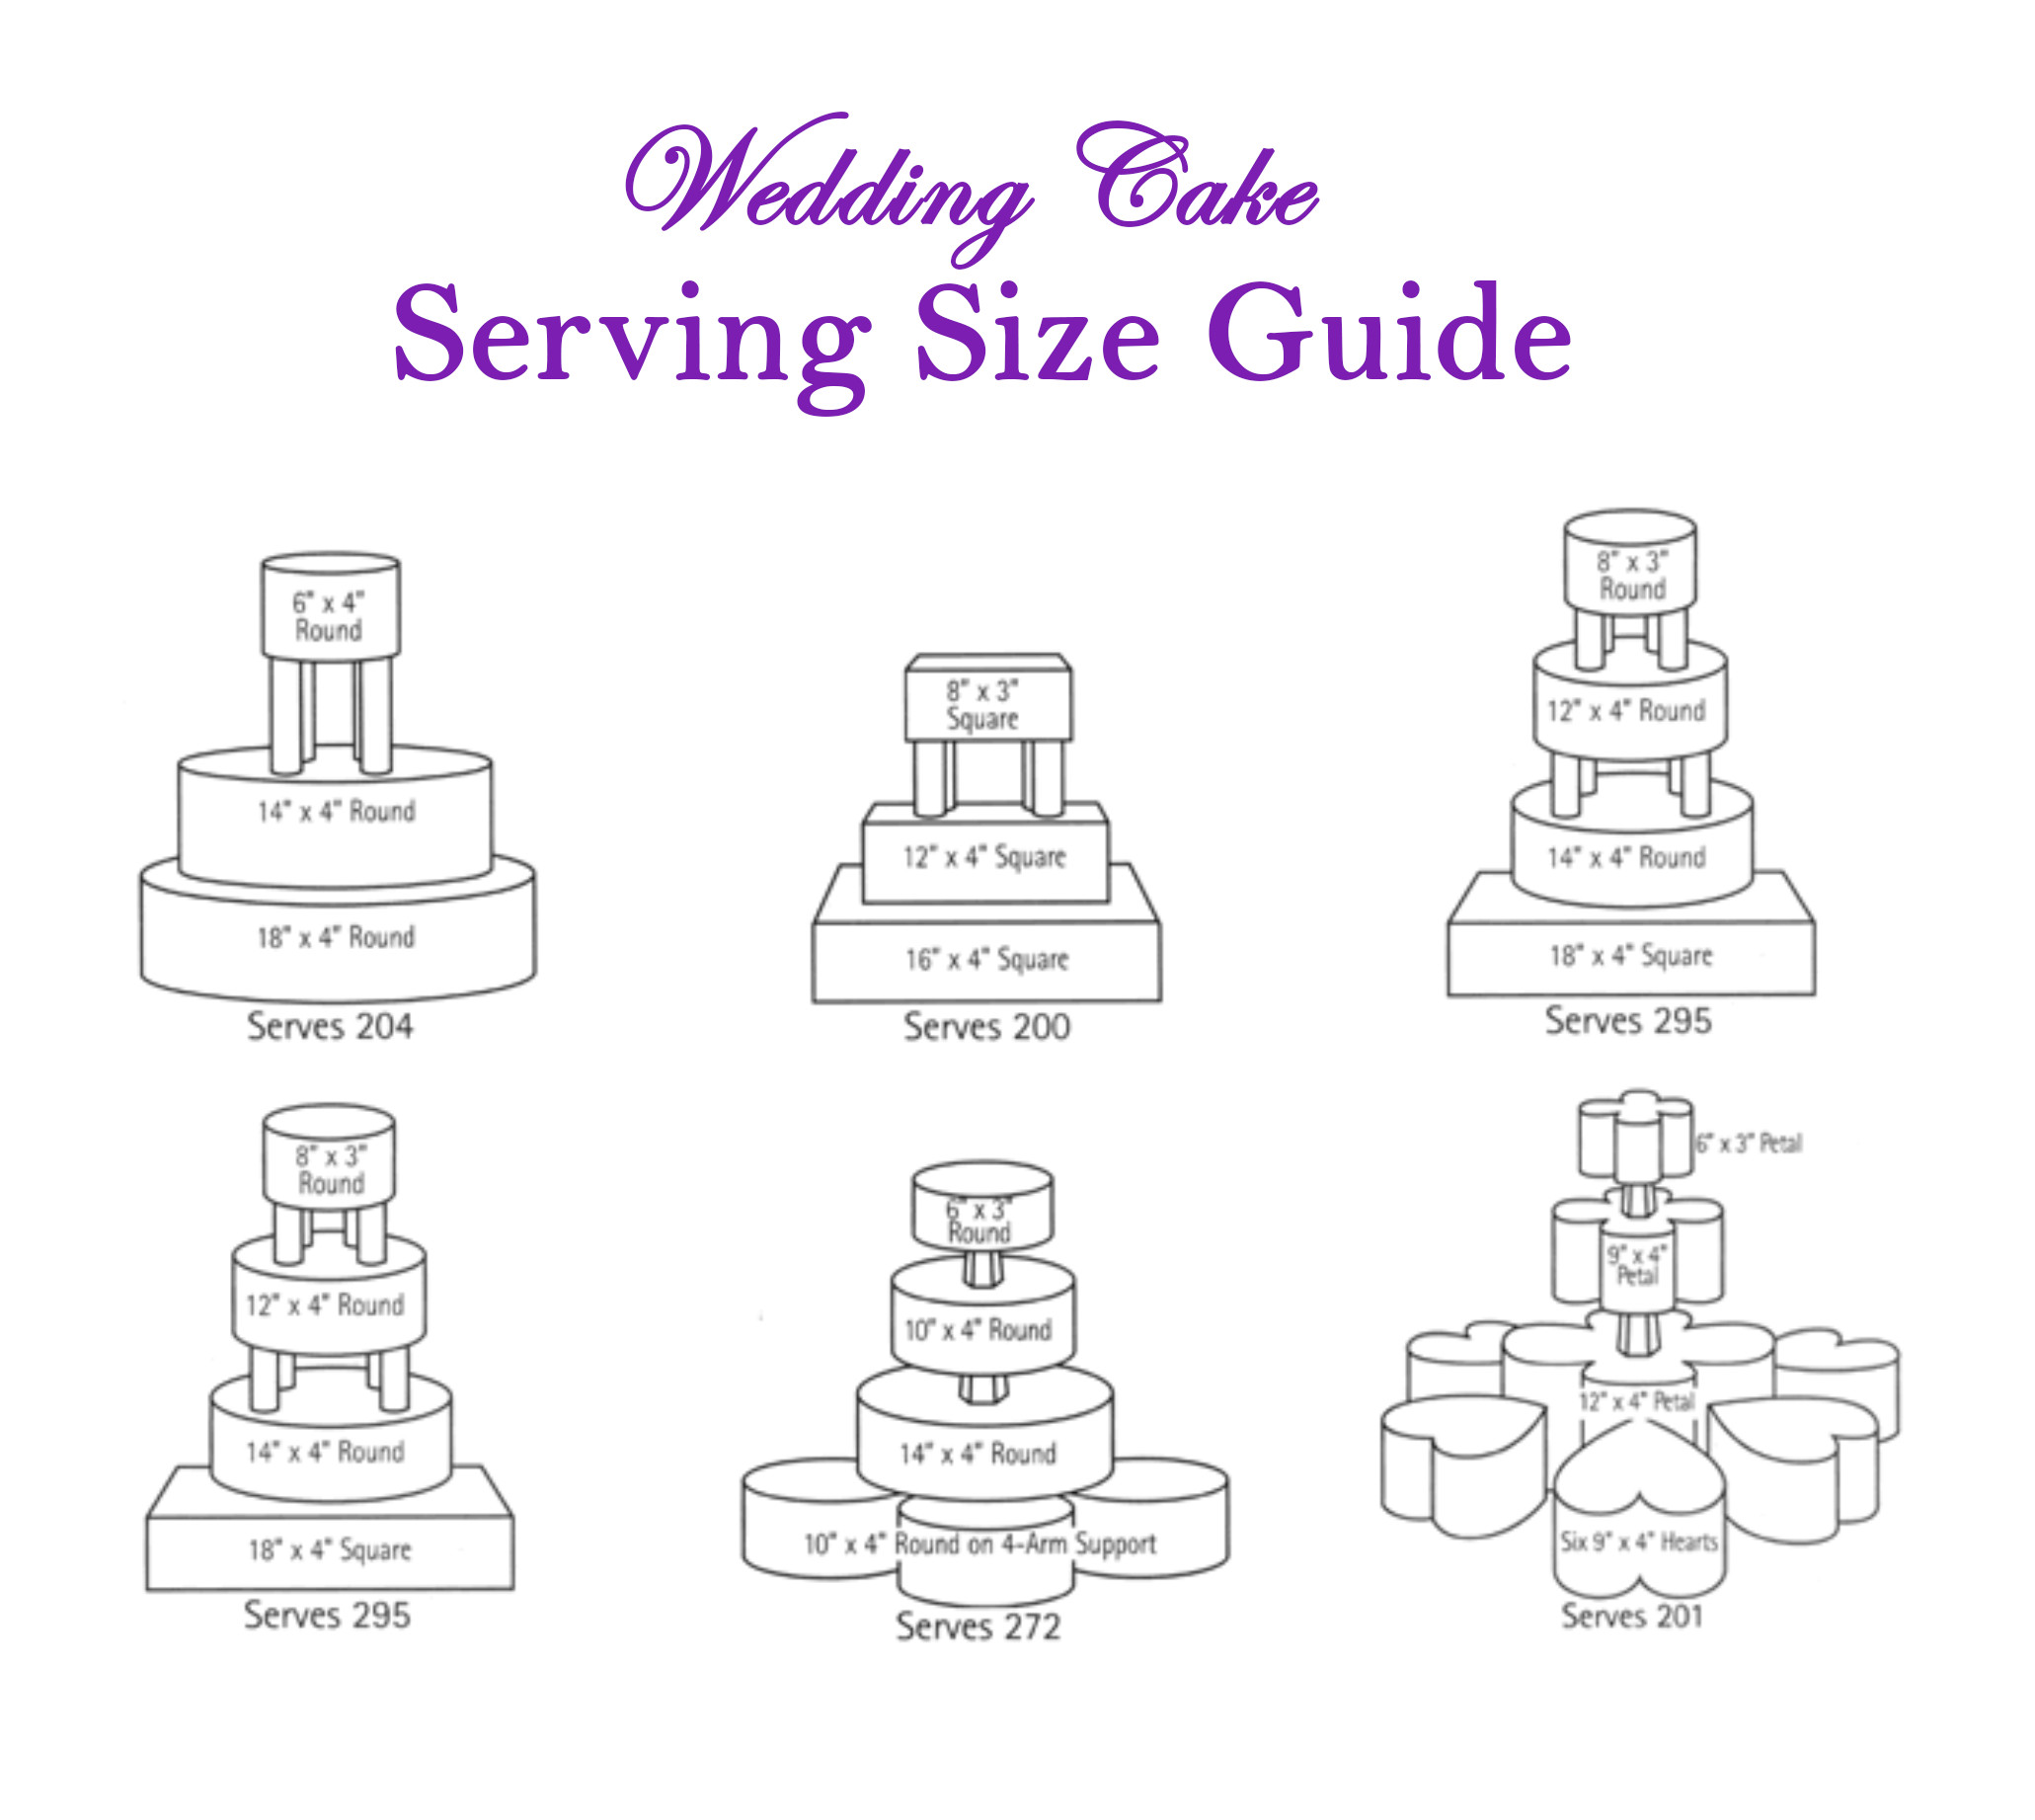 Wedding Cake Servings
 Wedding Cake Serving Size Guide from